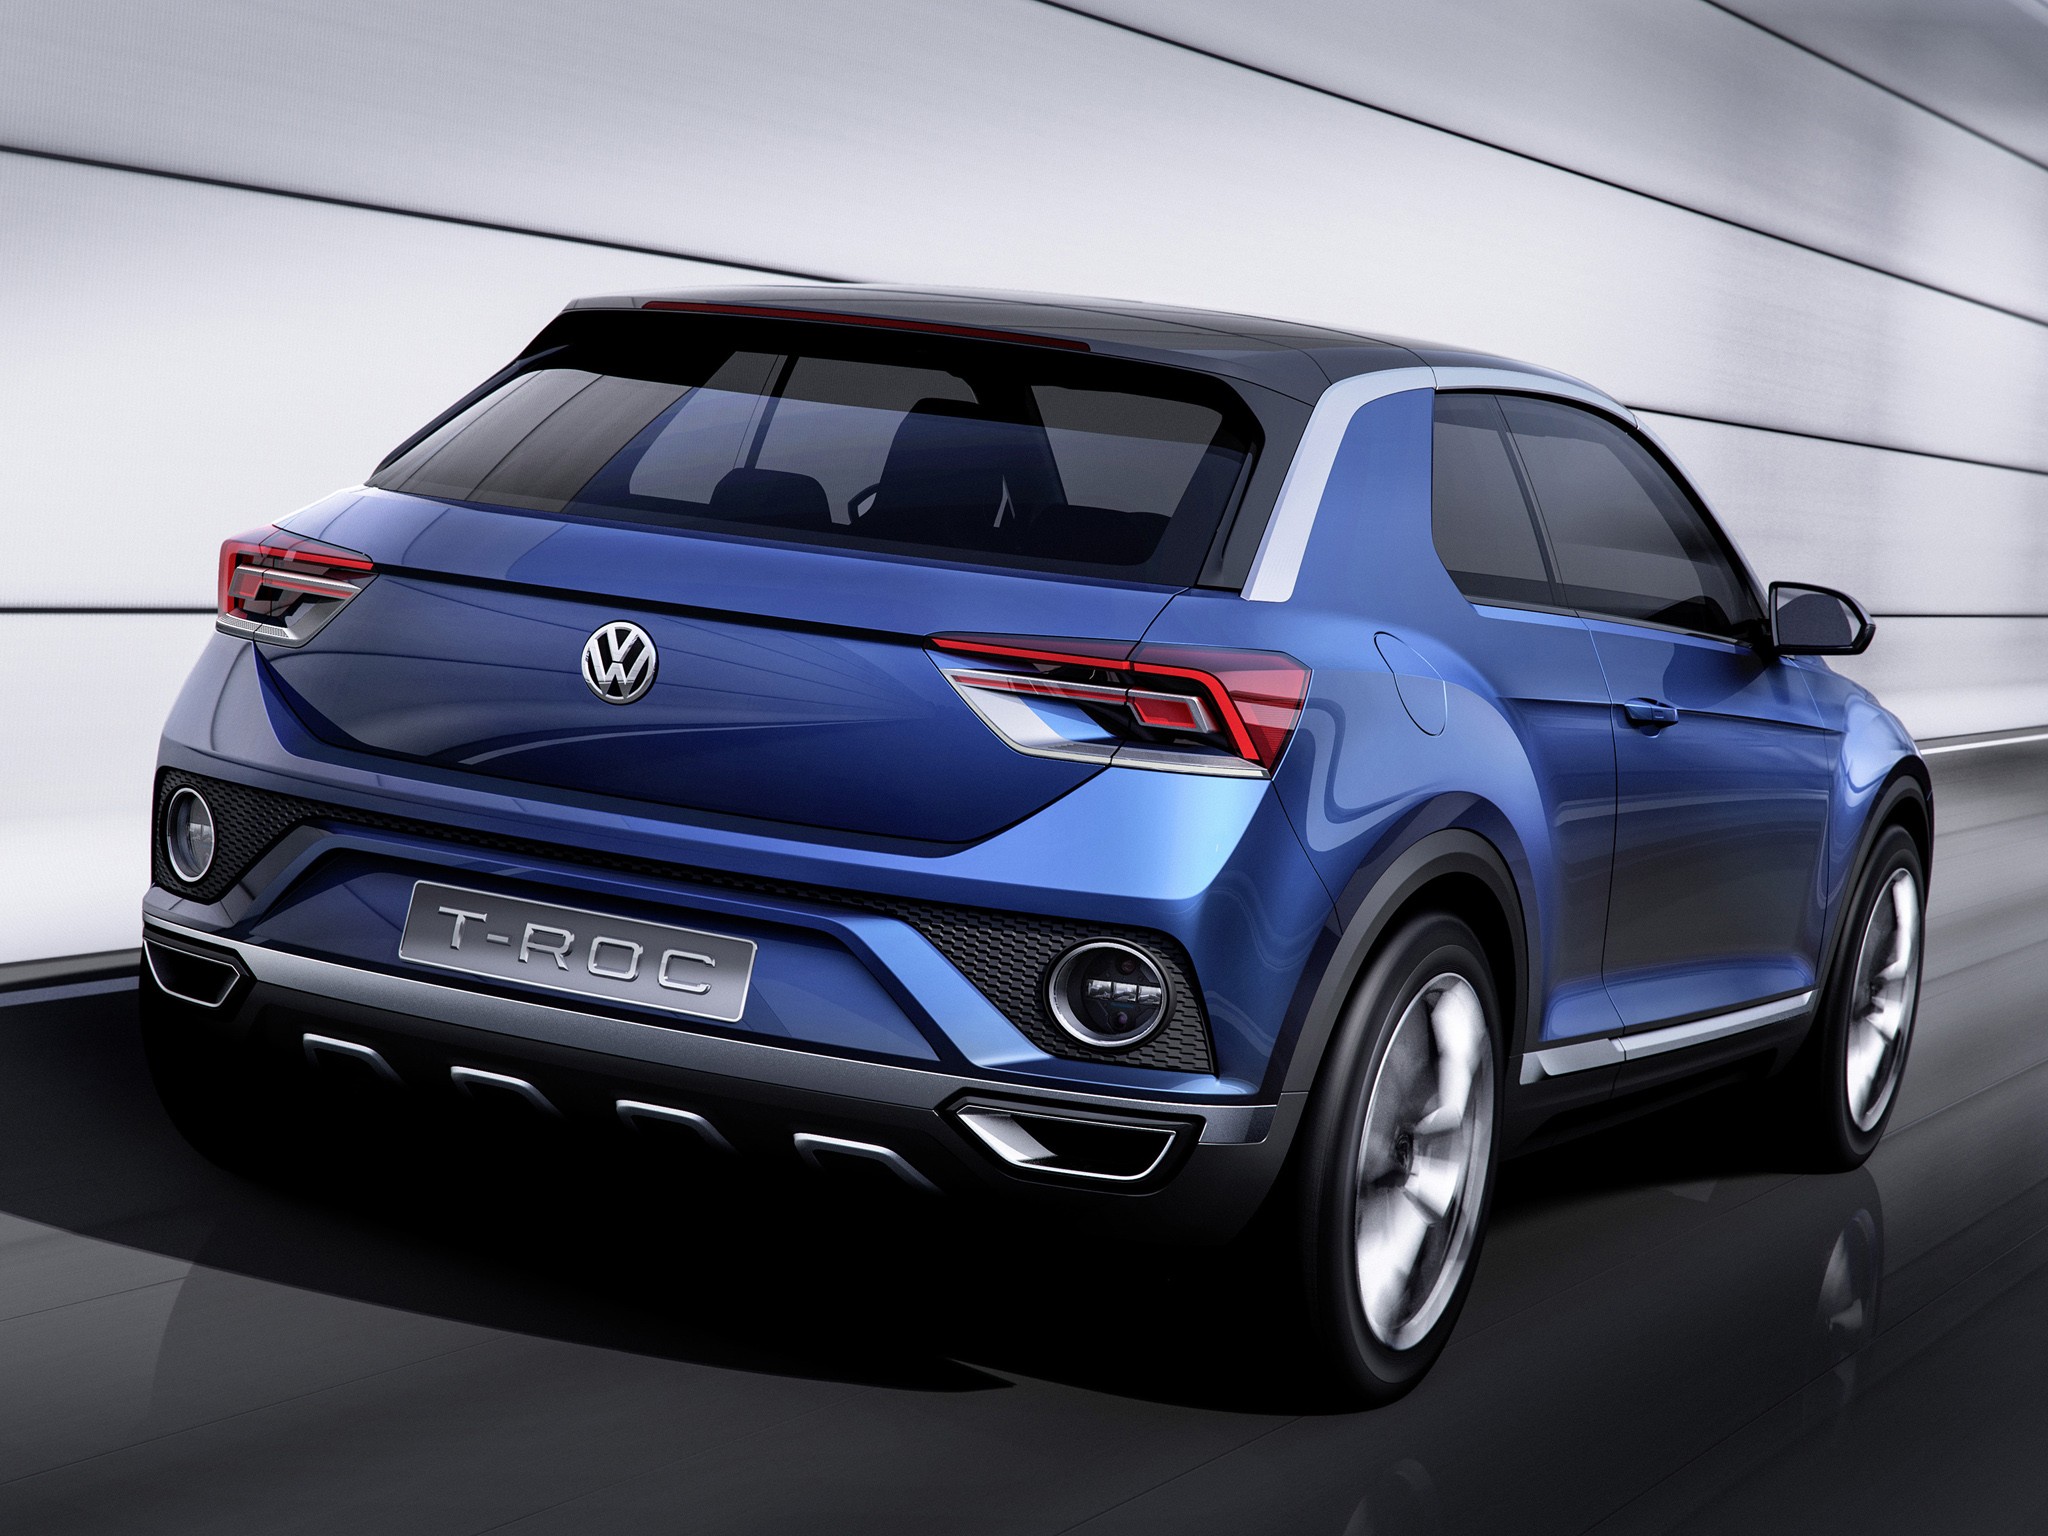 A driver's delight, the Volkswagen T-Roc defines affordable luxury